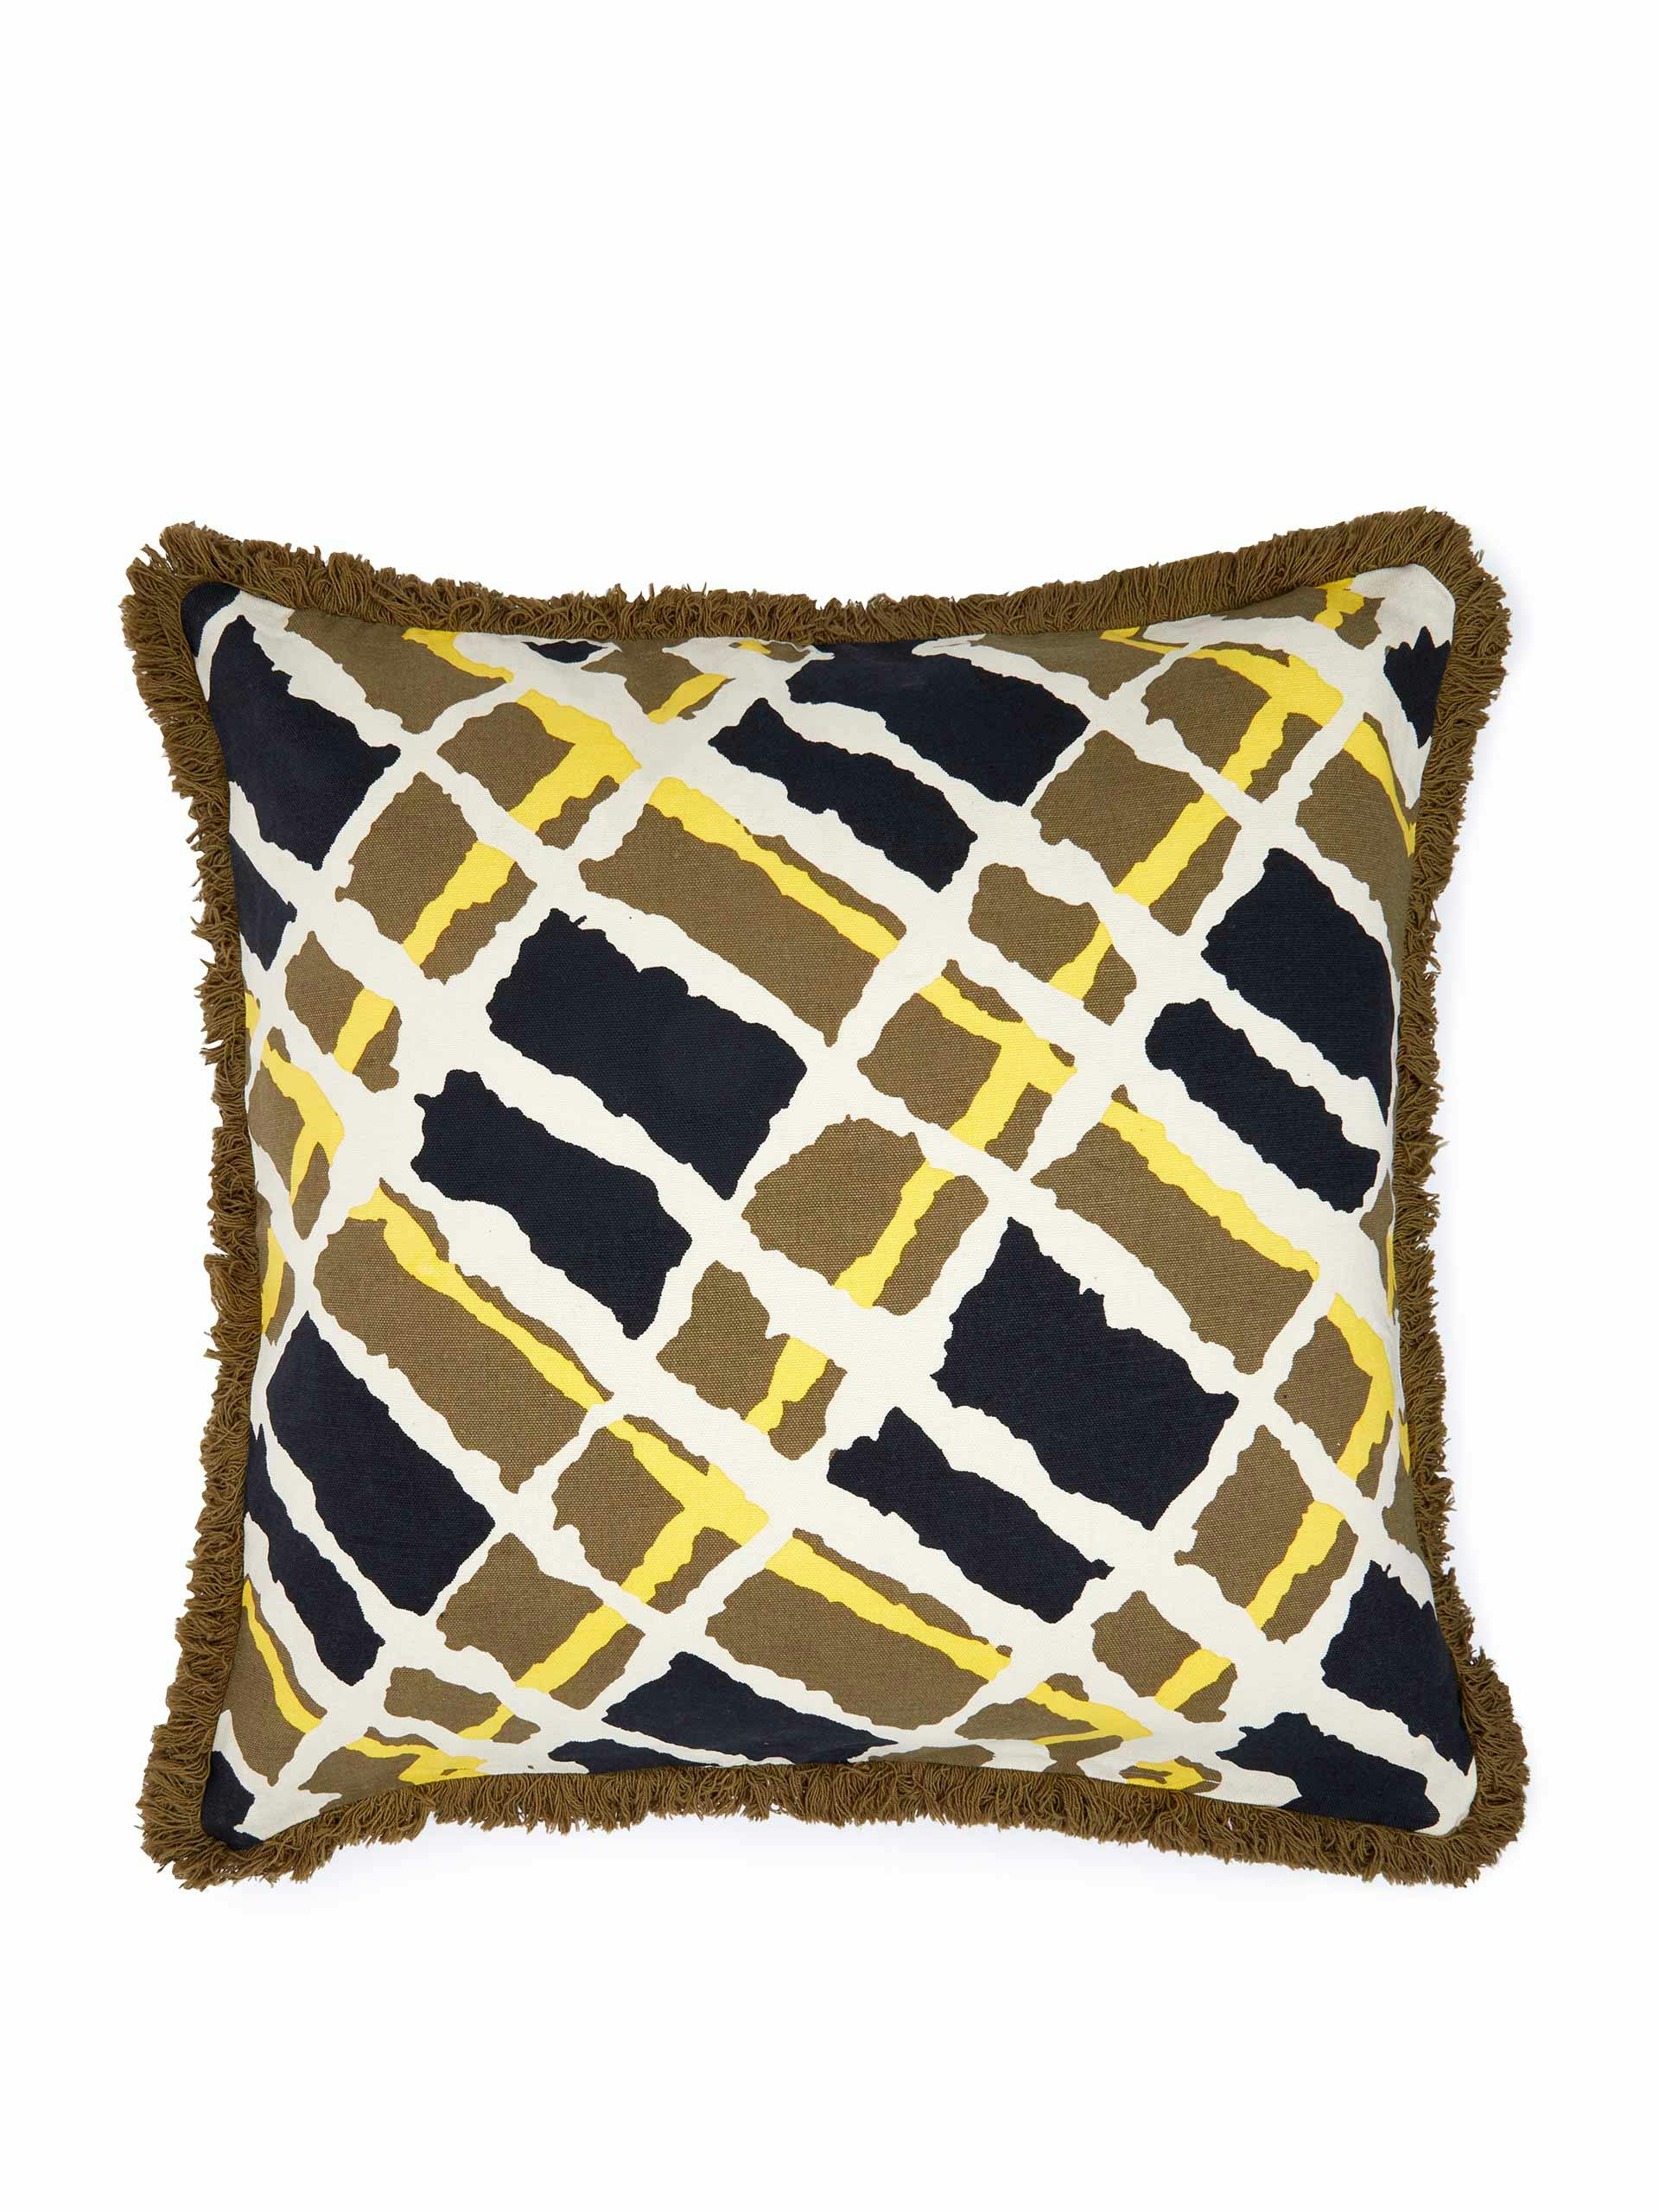 Khaki ink check patterned cushion cover